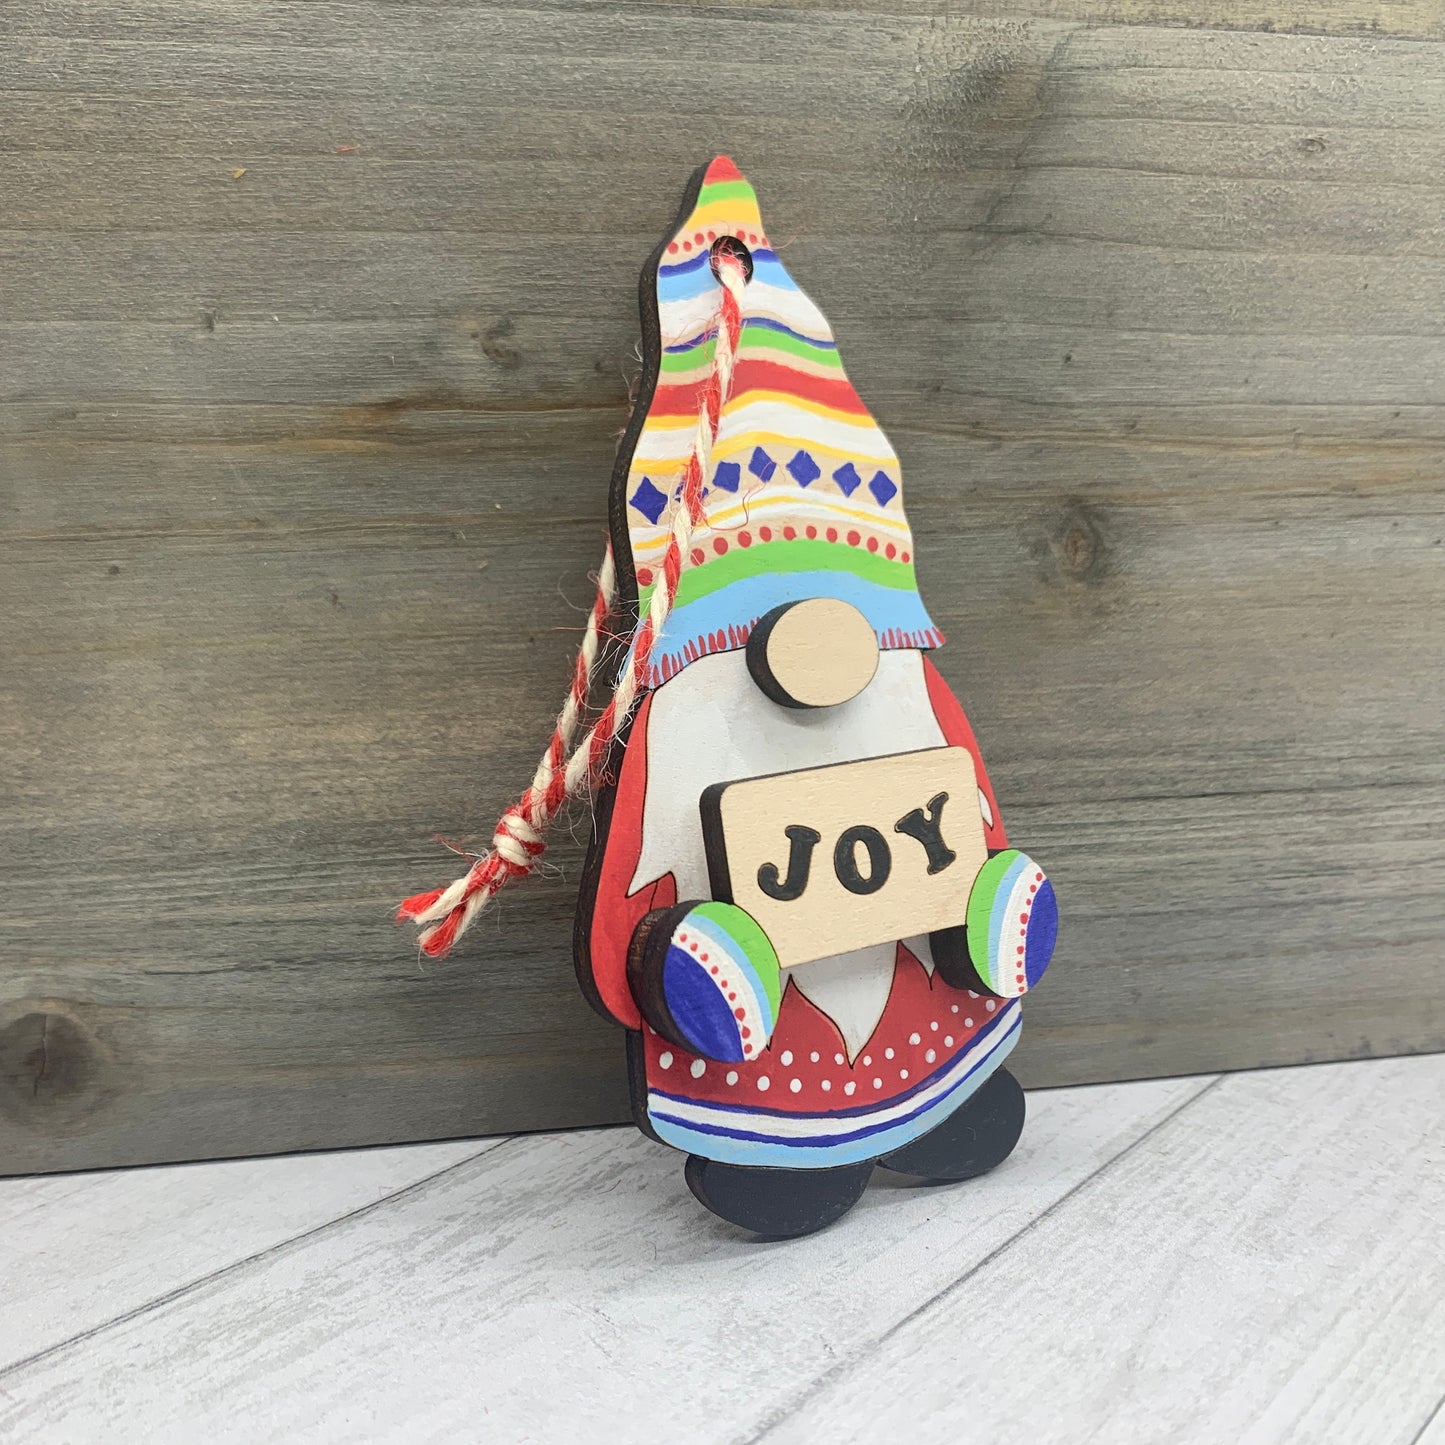 DIY Gnome Ornament Craft Kit | Paint Party | Craft Night | Kids Party Activity | Christmas Craft